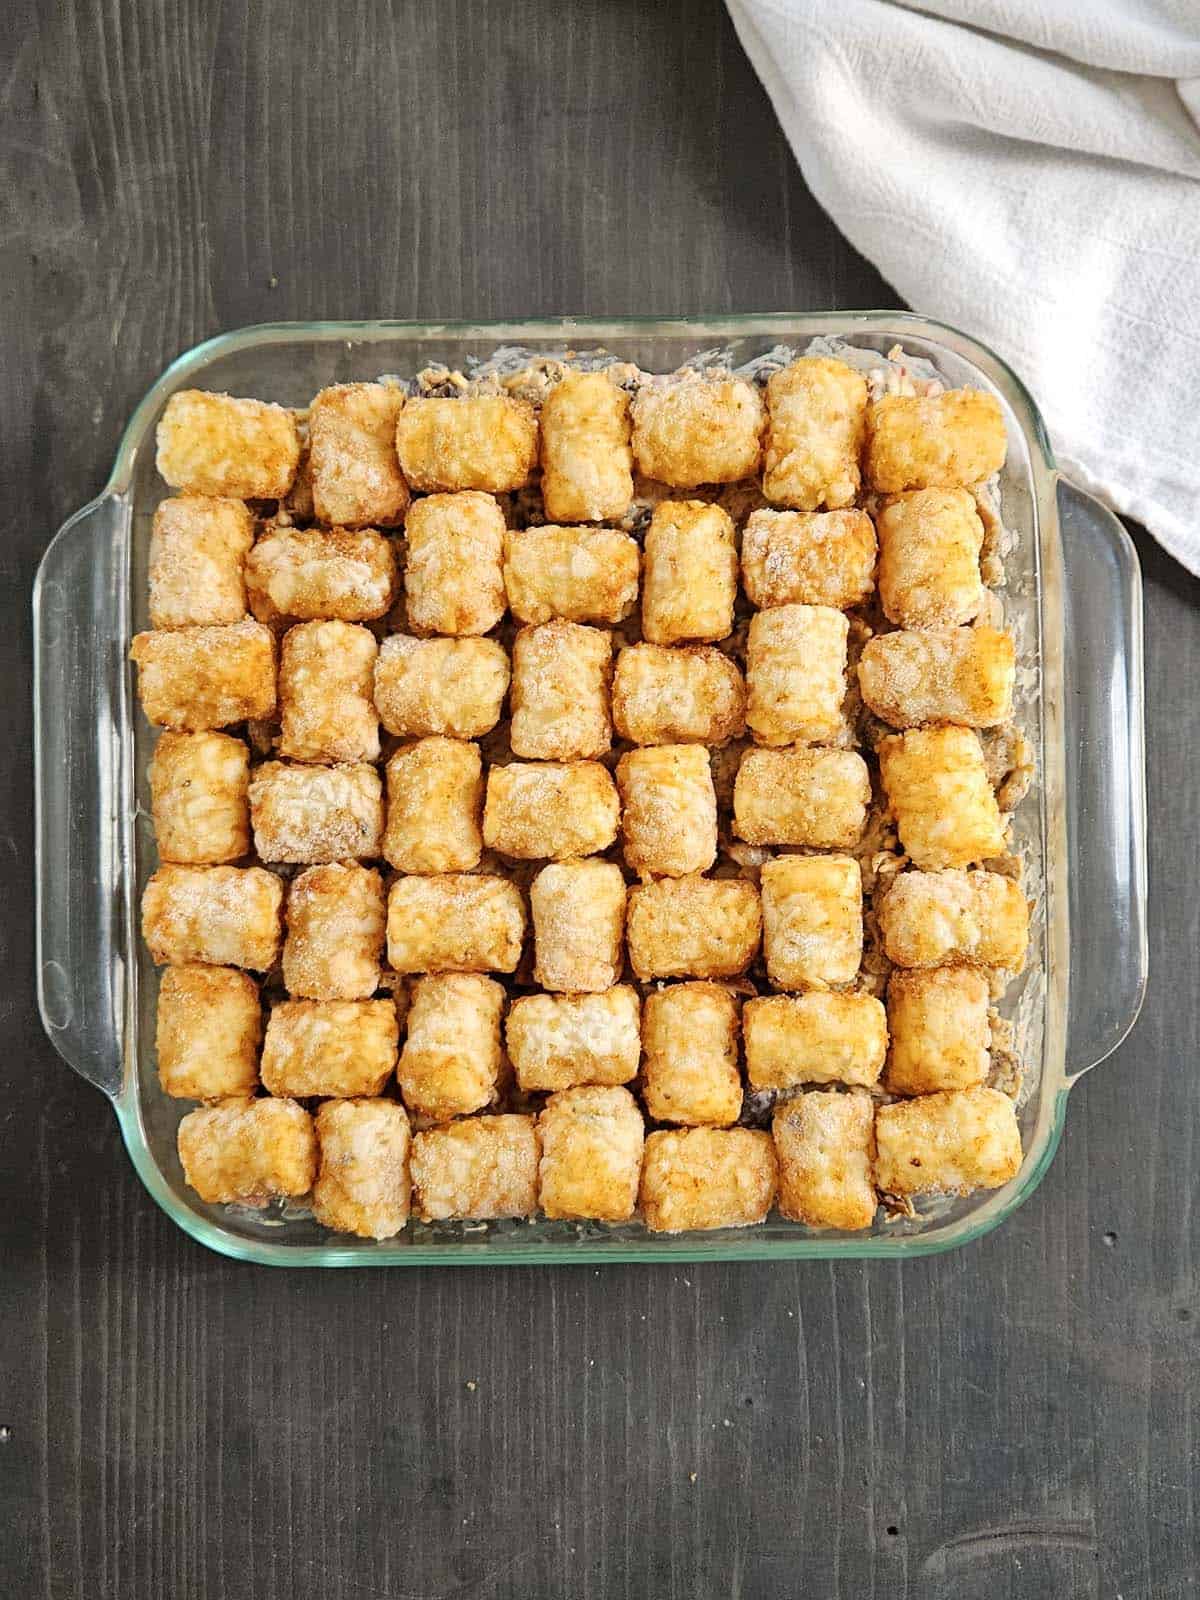 Pork casserole topped with frozen tater tots in a glass casserole dish.